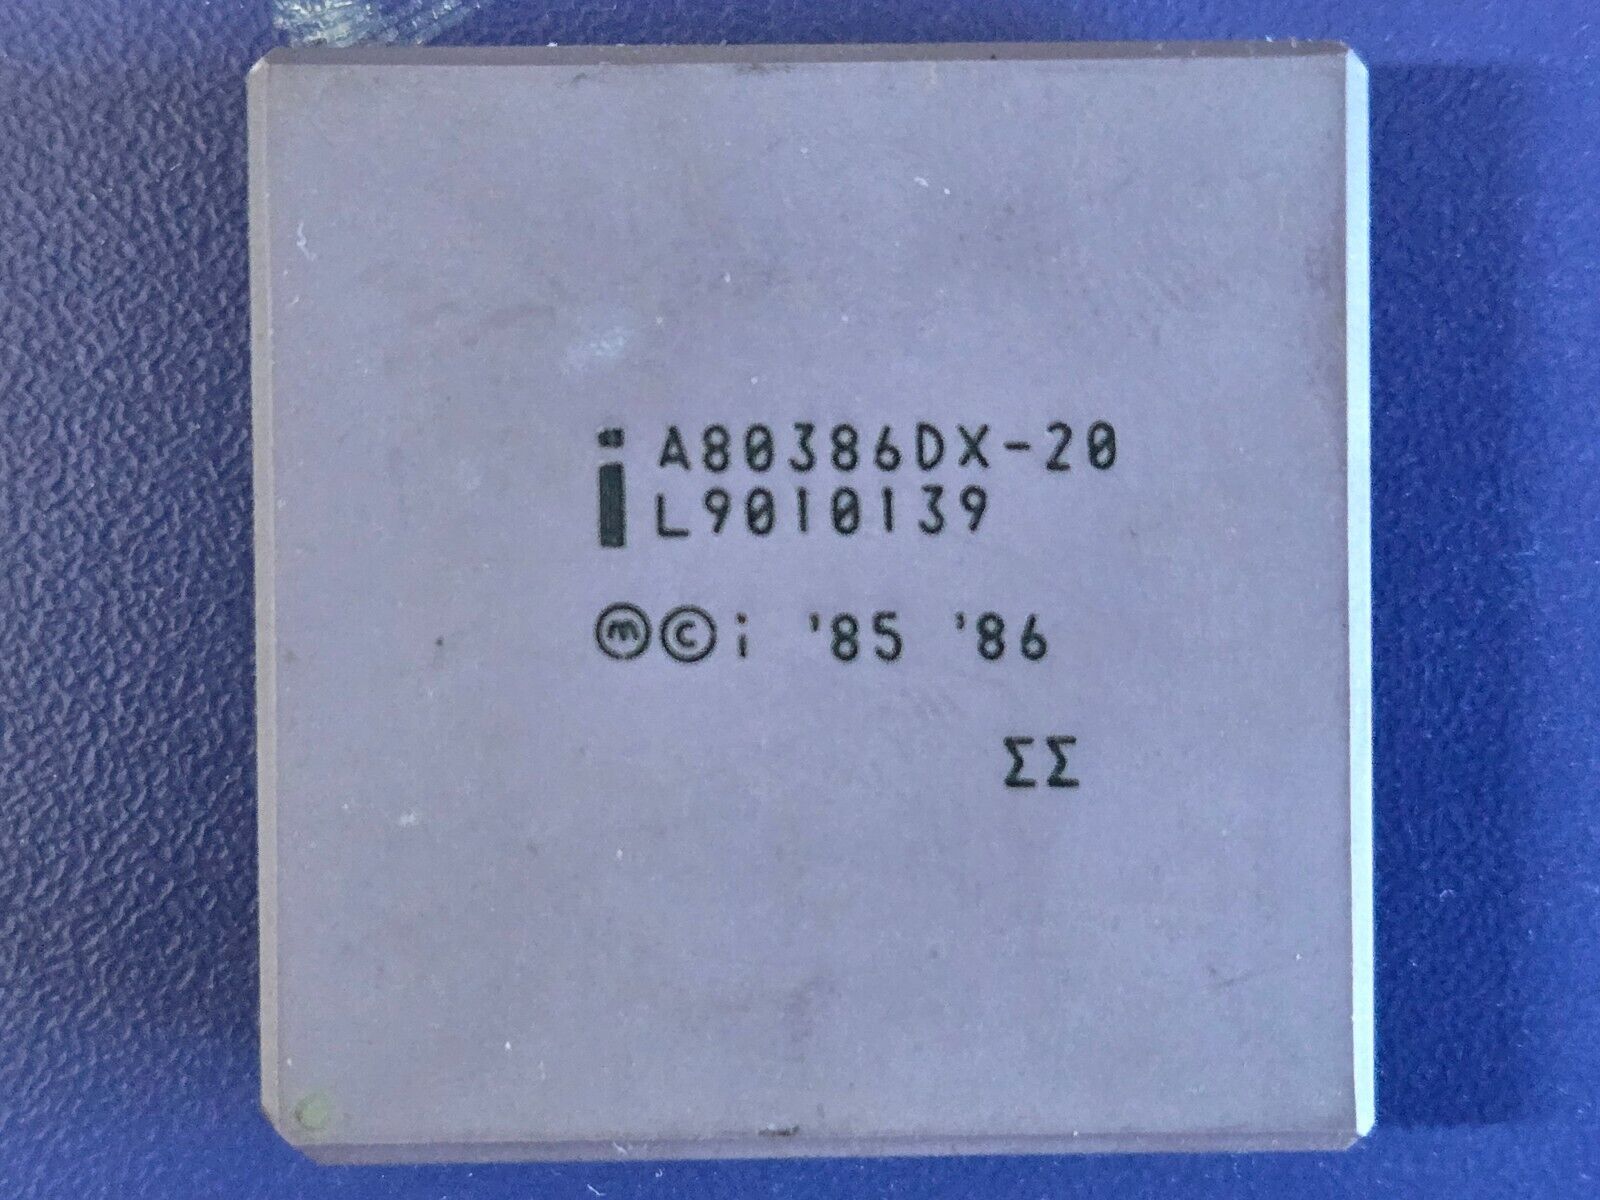 386DX-20 CPU, Intel A80386DX-20 (Early, ΣΣ Double Sigma) Vintage/Retro